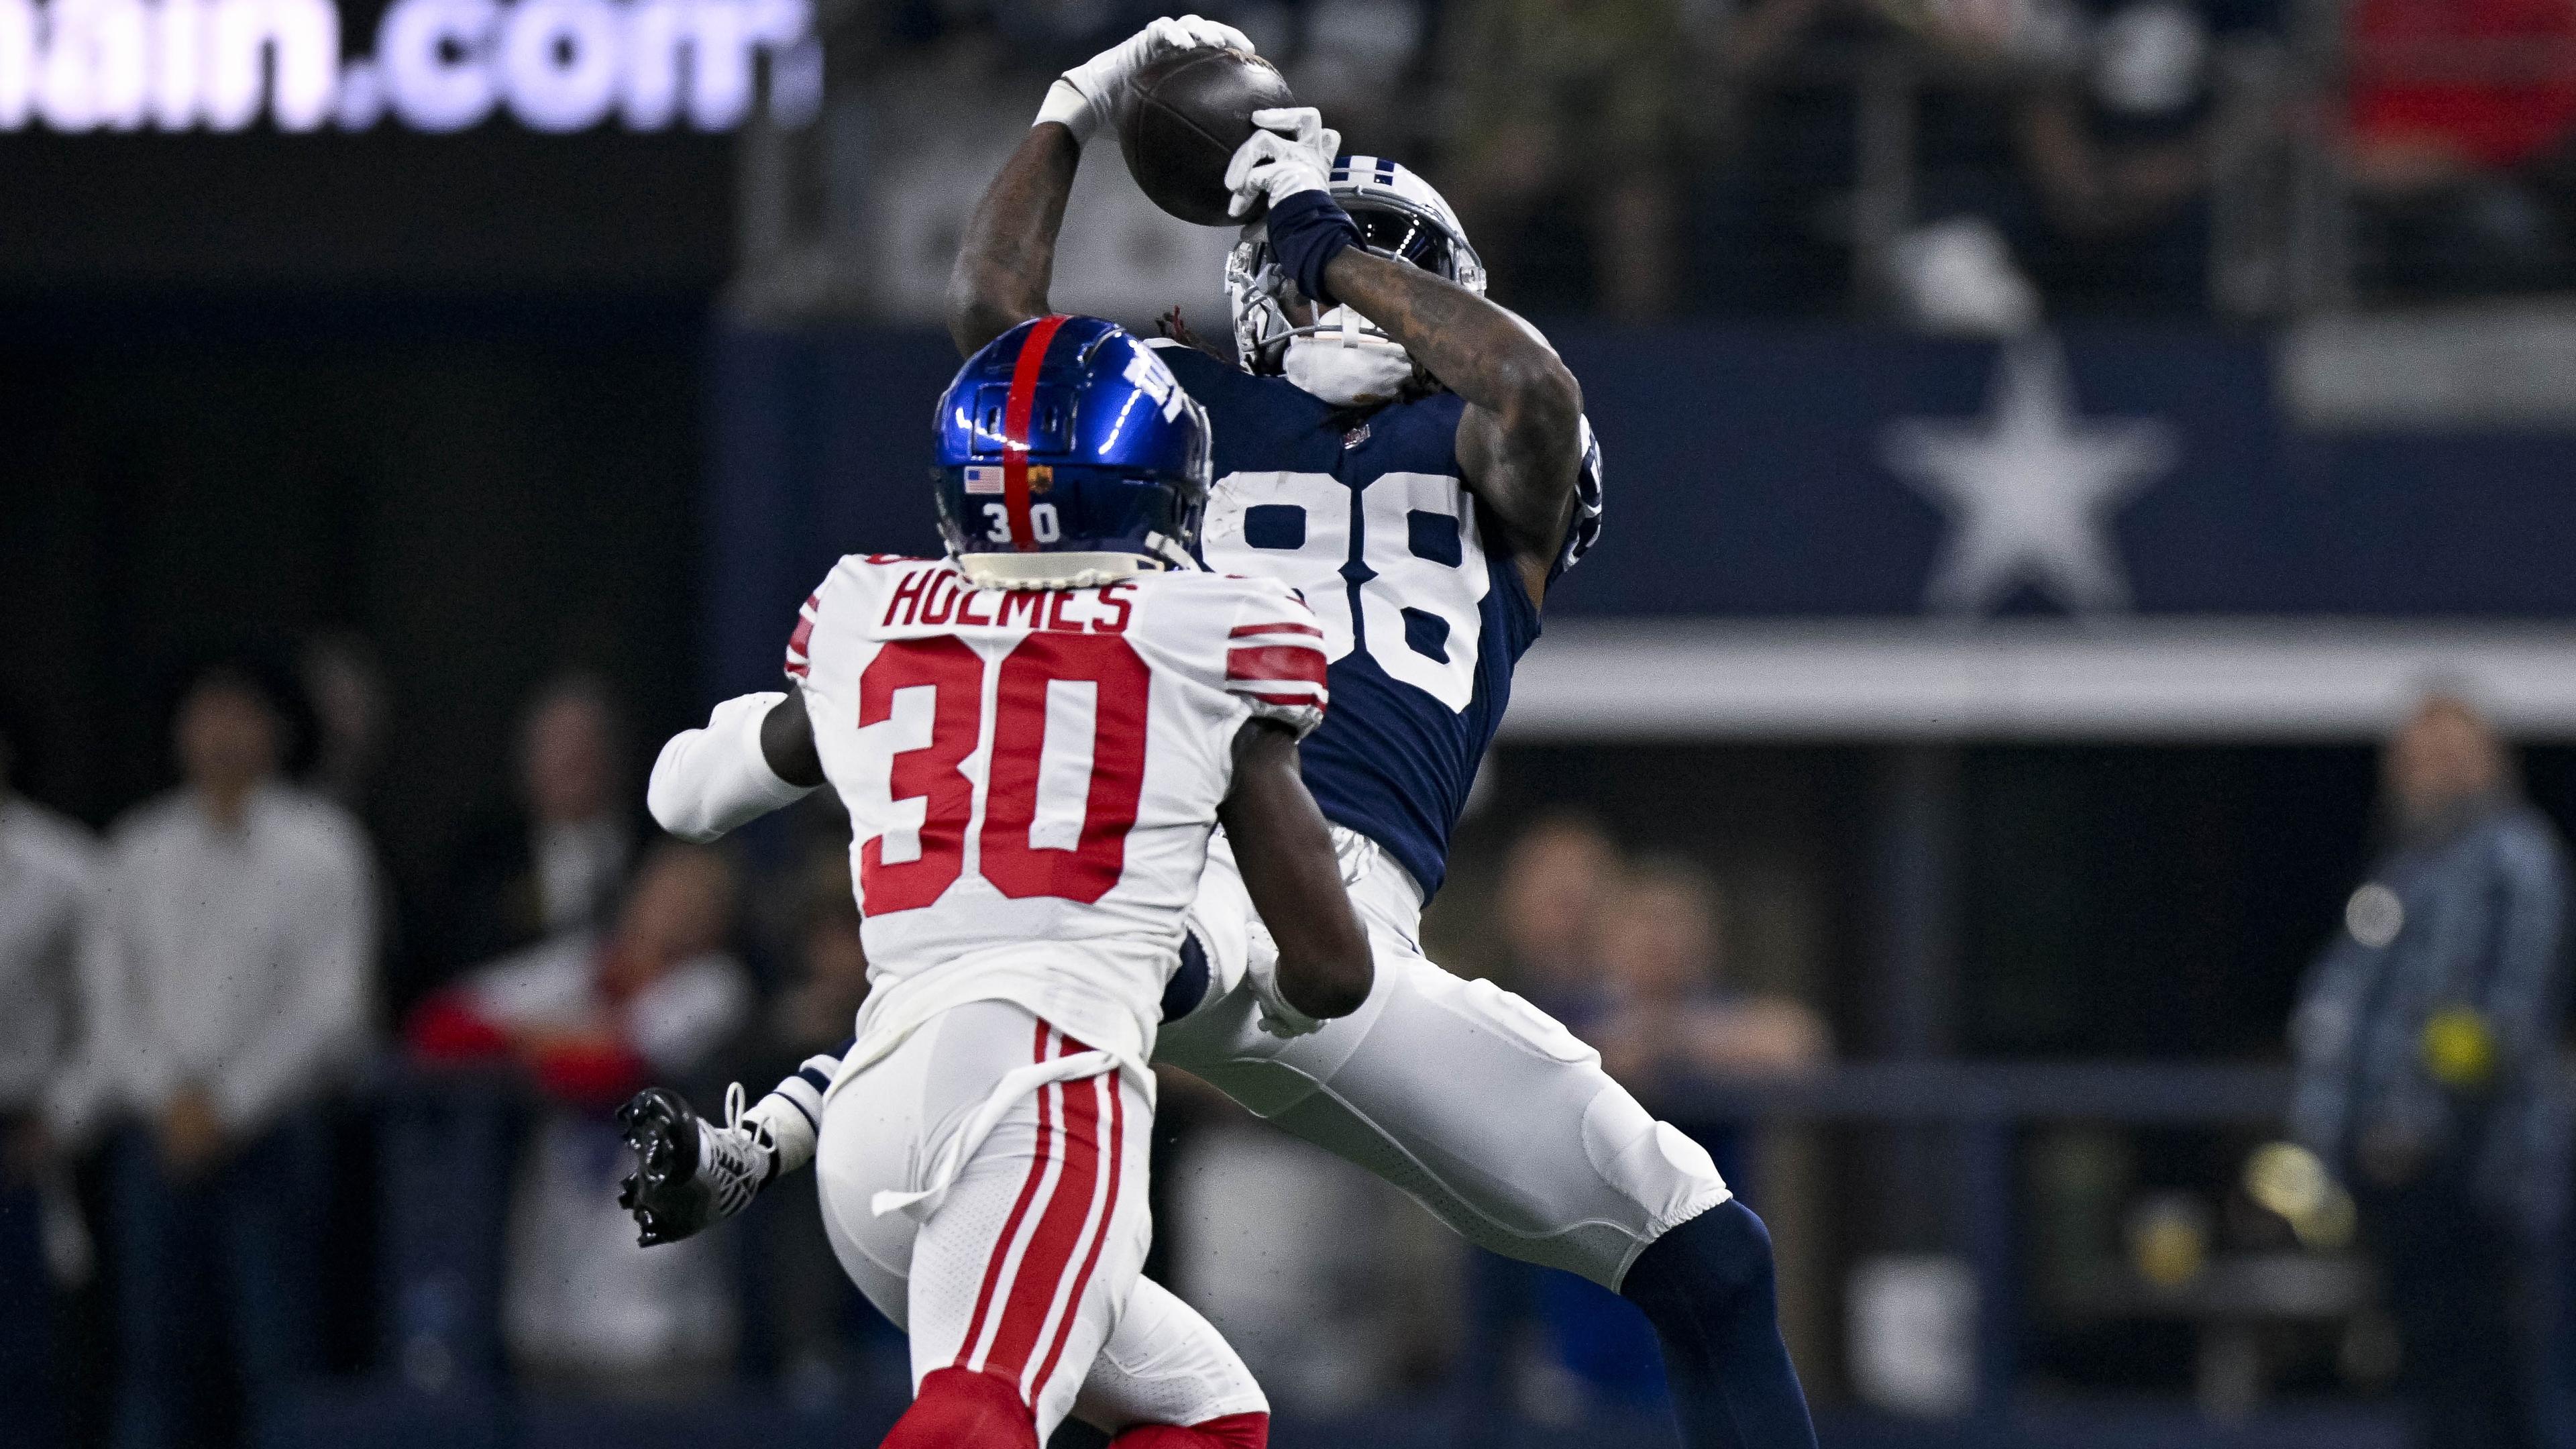 Dallas Cowboys wide receiver CeeDee Lamb (88) catches a pass over New York Giants cornerback Darnay Holmes (30) during the first quarter at AT&T Stadium / Jerome Miron - USA TODAY Sports